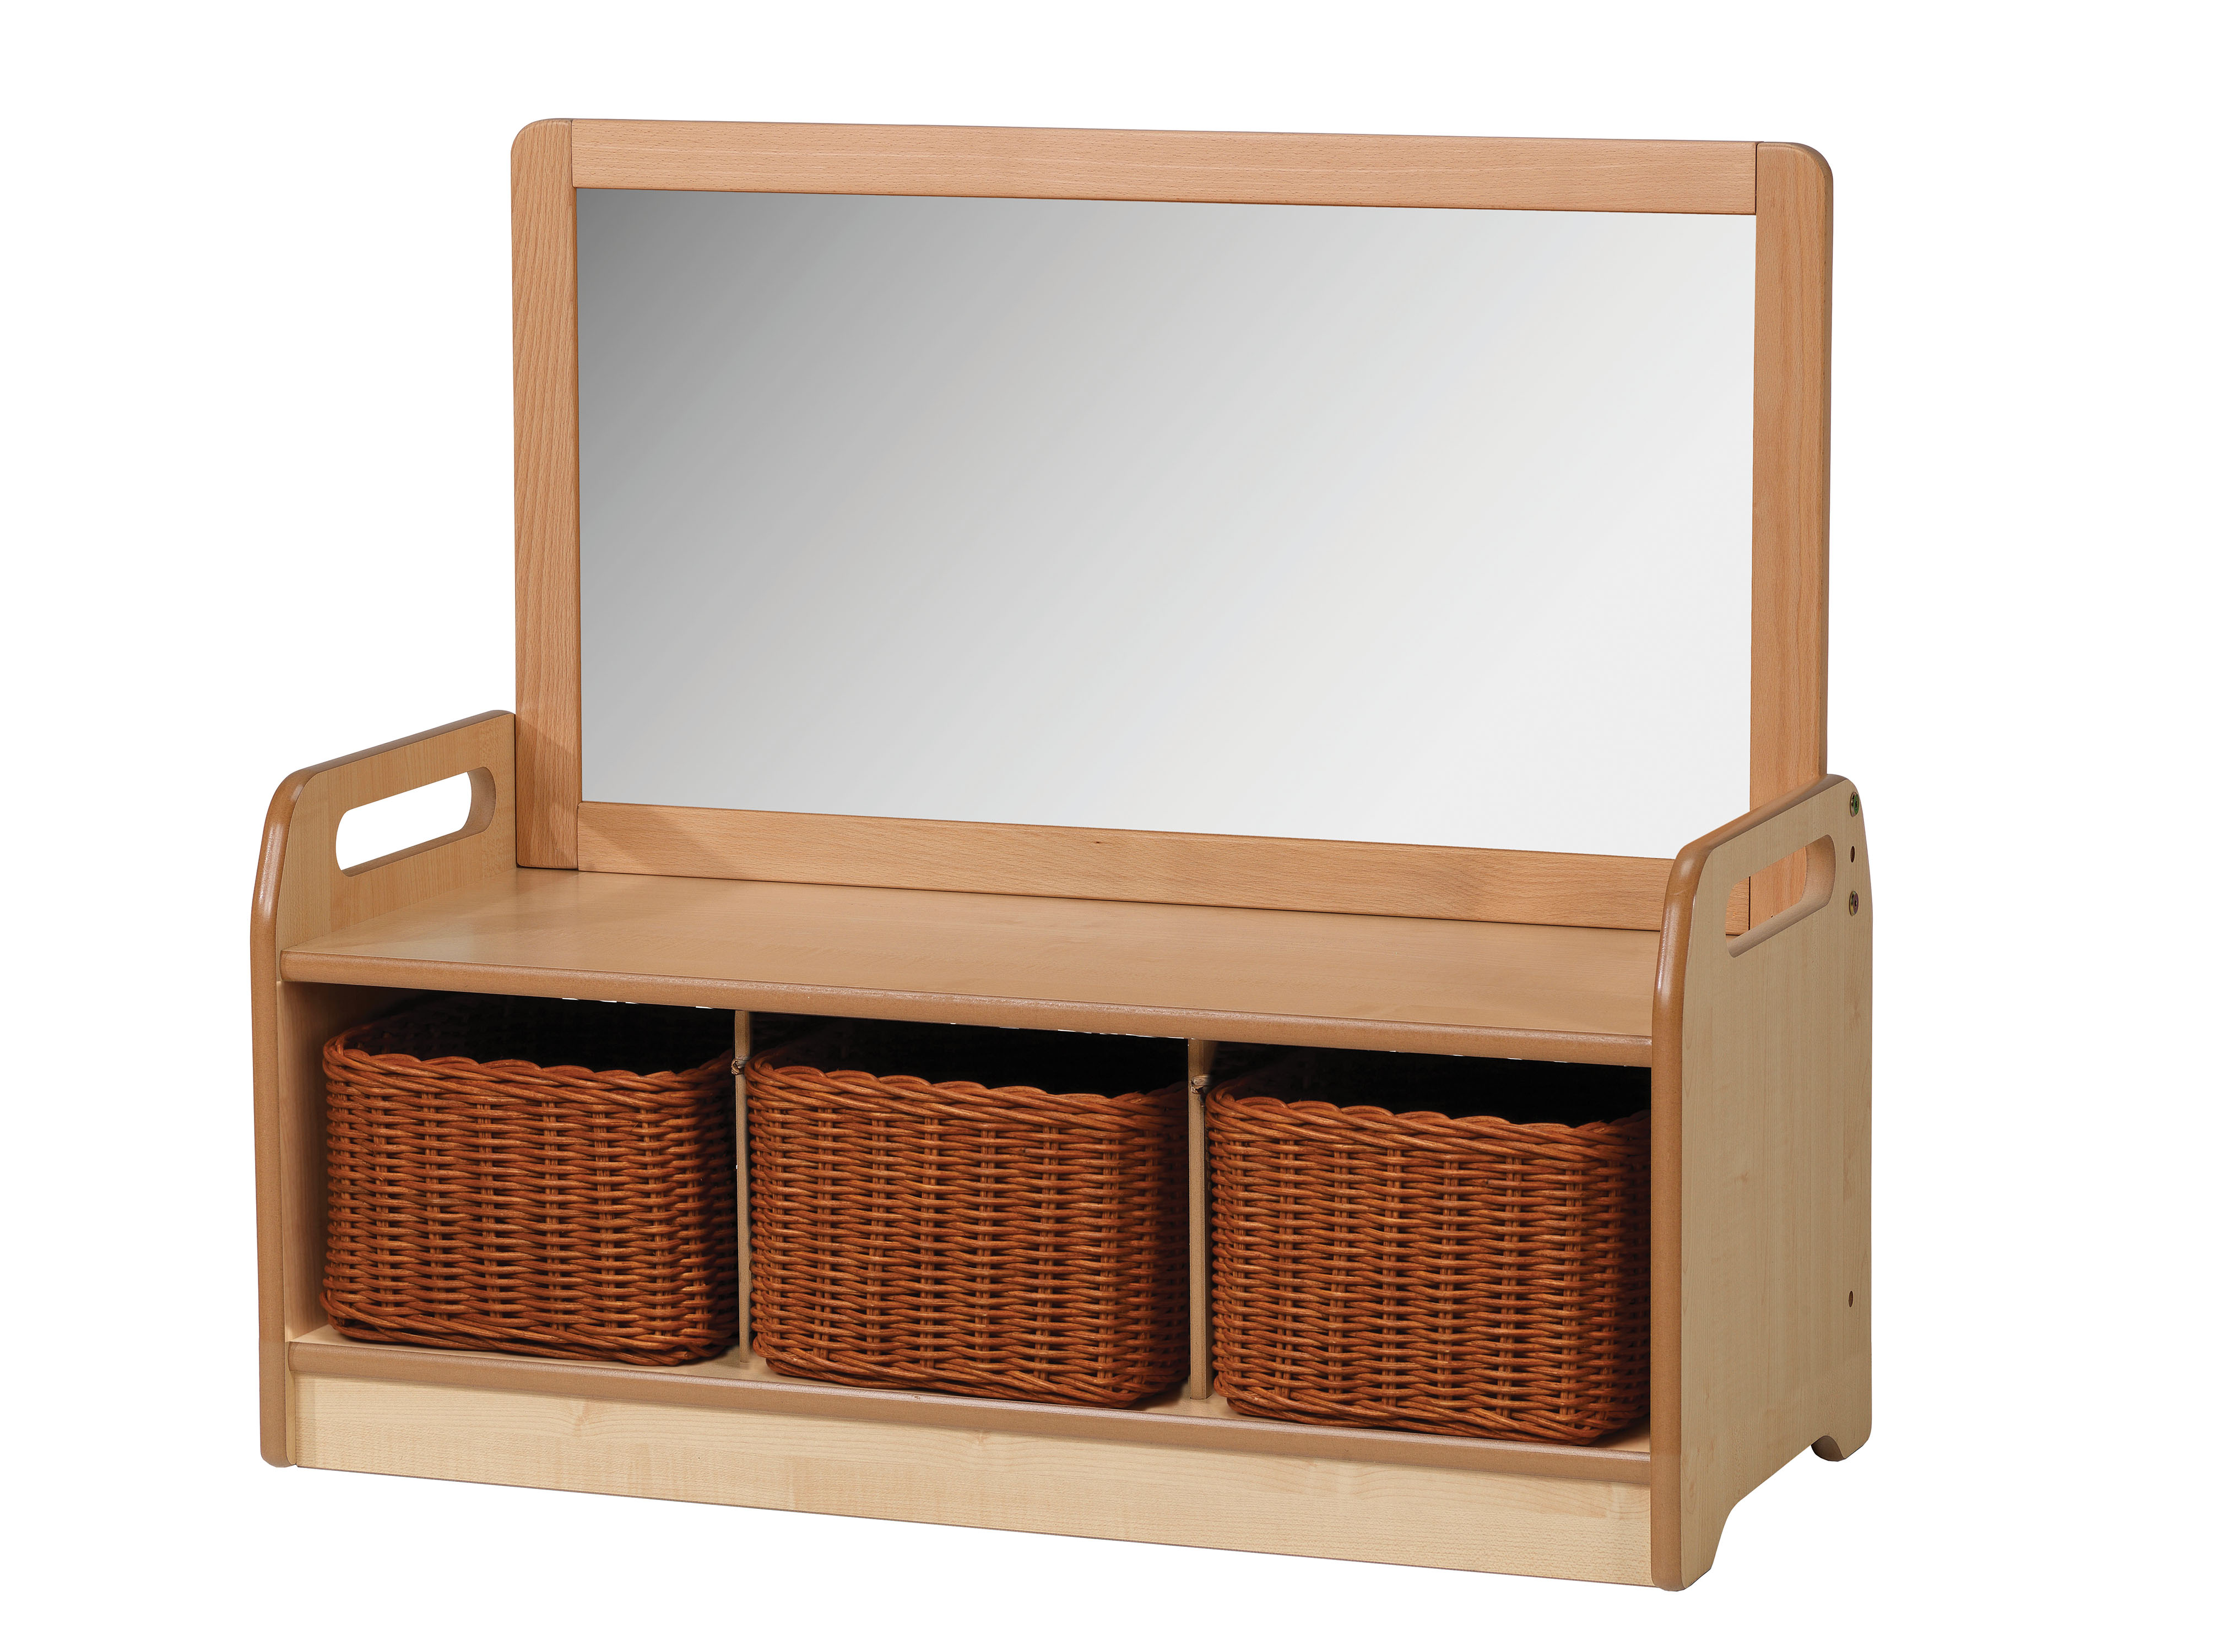 PT591-Millhouse-Early-Years-Furniture-Low-Mirror-Storage-Unit-With-Baskets_Main_RGB.jpg